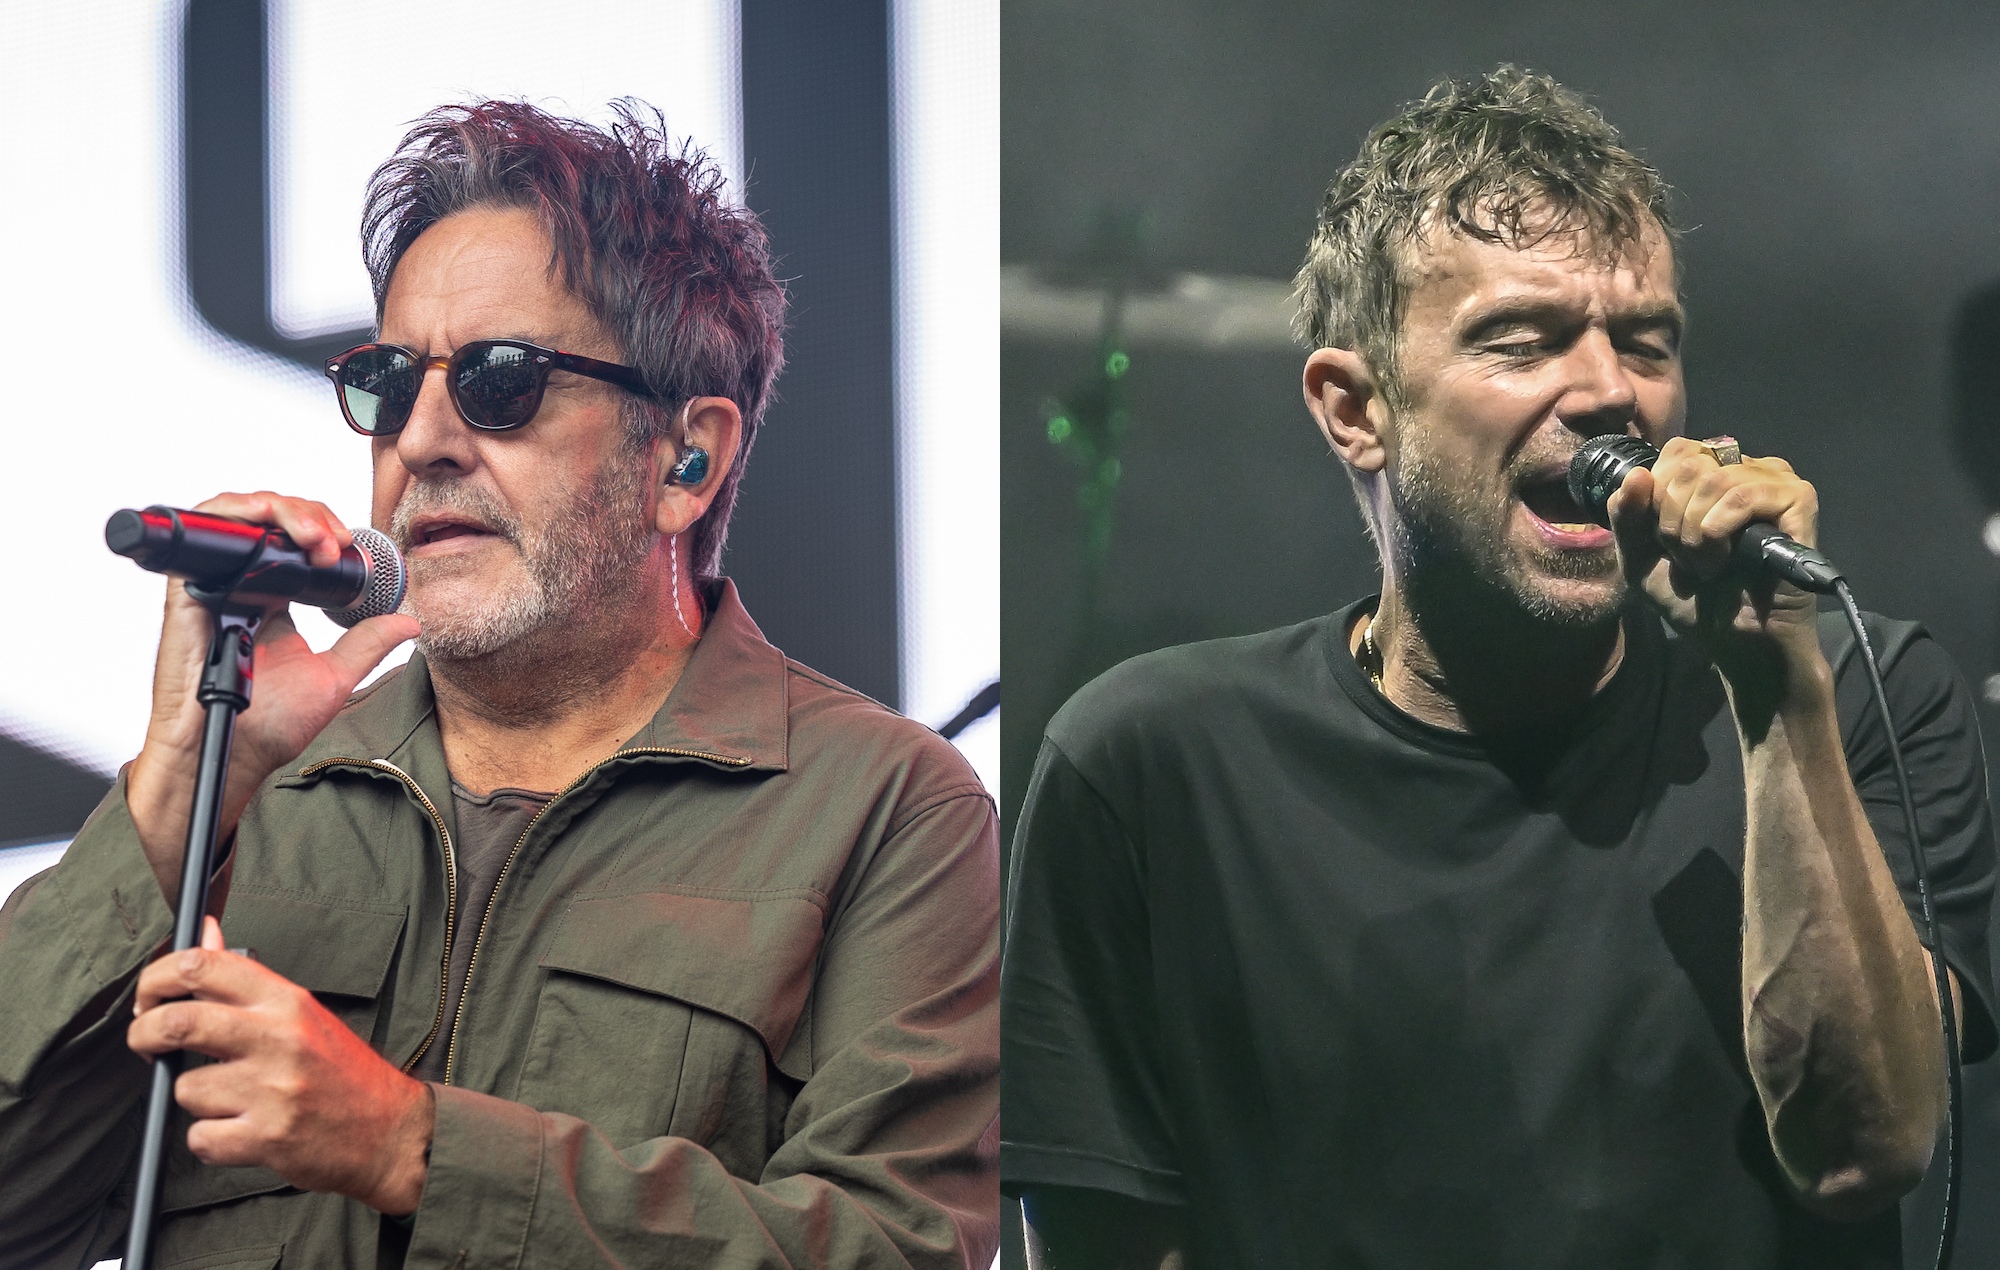 Damon Albarn recalls first encounter with The Specials’ Terry Hall: “The coolest human being on earth”